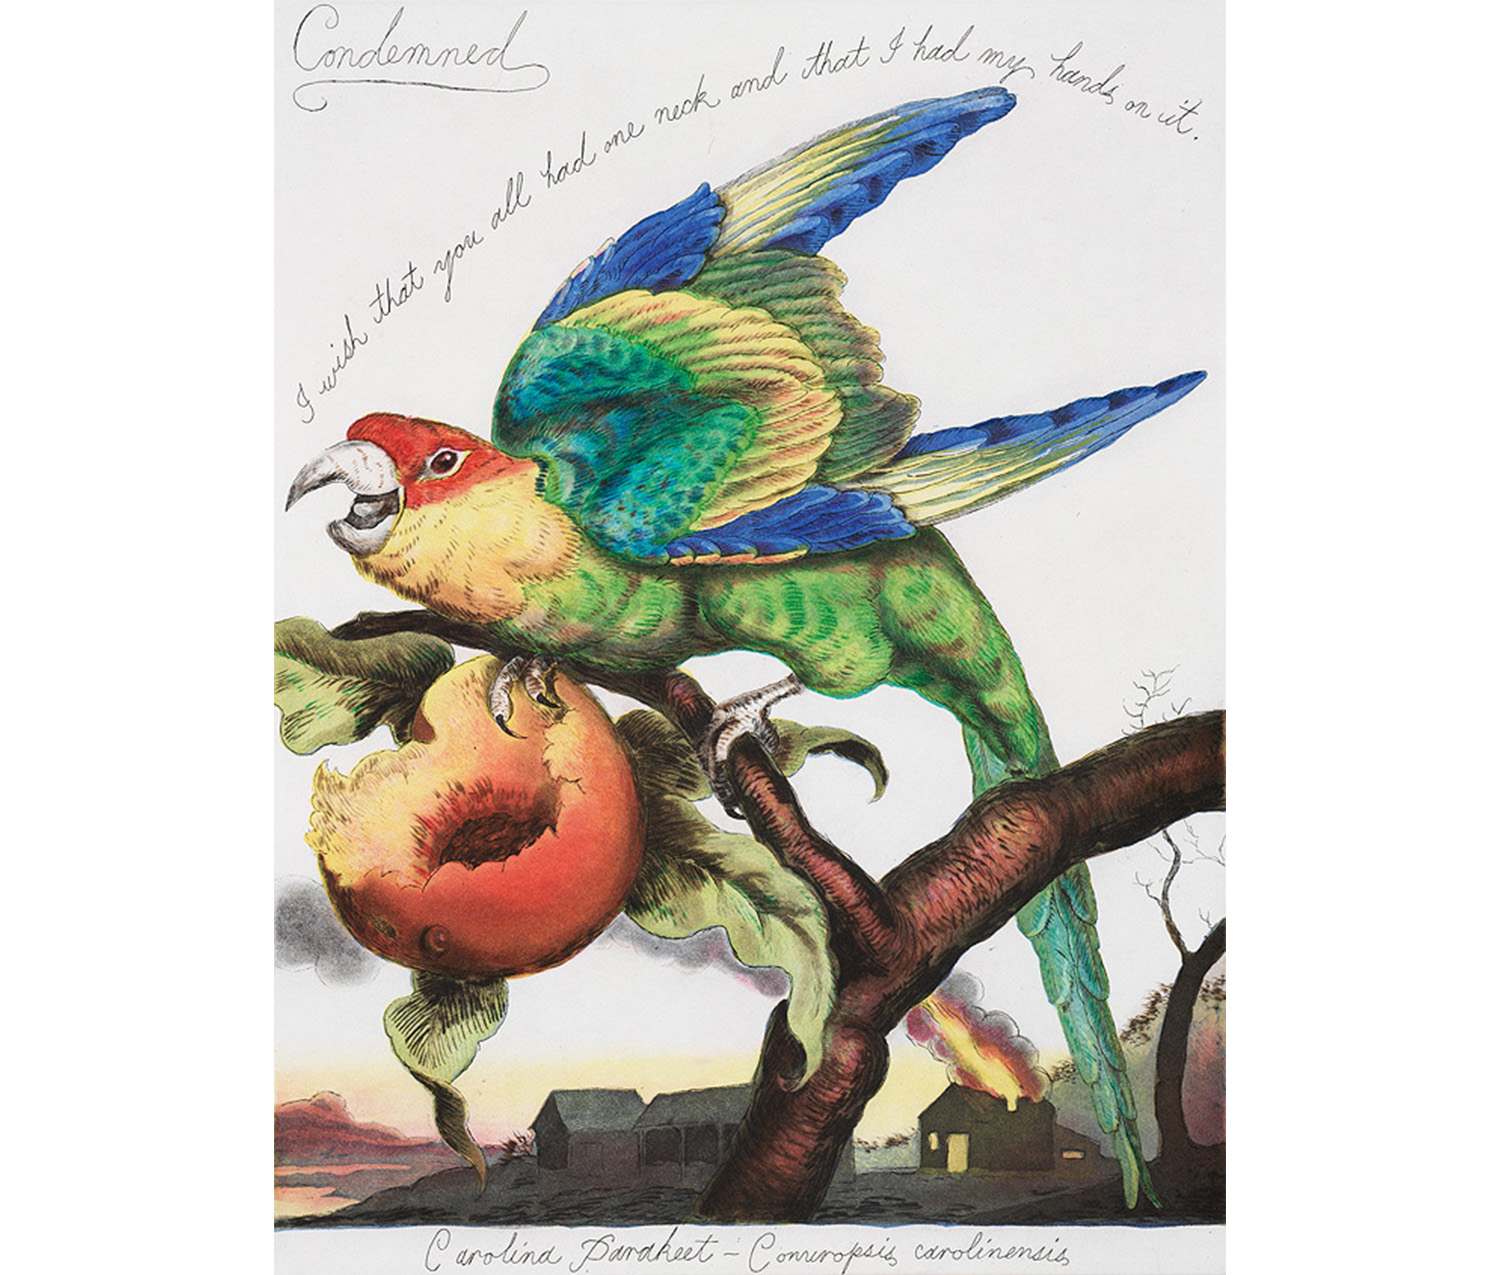 landscape with barns and house across bottom, pink and yellow sunset at horizon edge moving up to a pale blue sky, peach tree branch with large half-eaten peach and colorful parakeet with wings up, text hand written around bird, "Condemned" hand written below bird